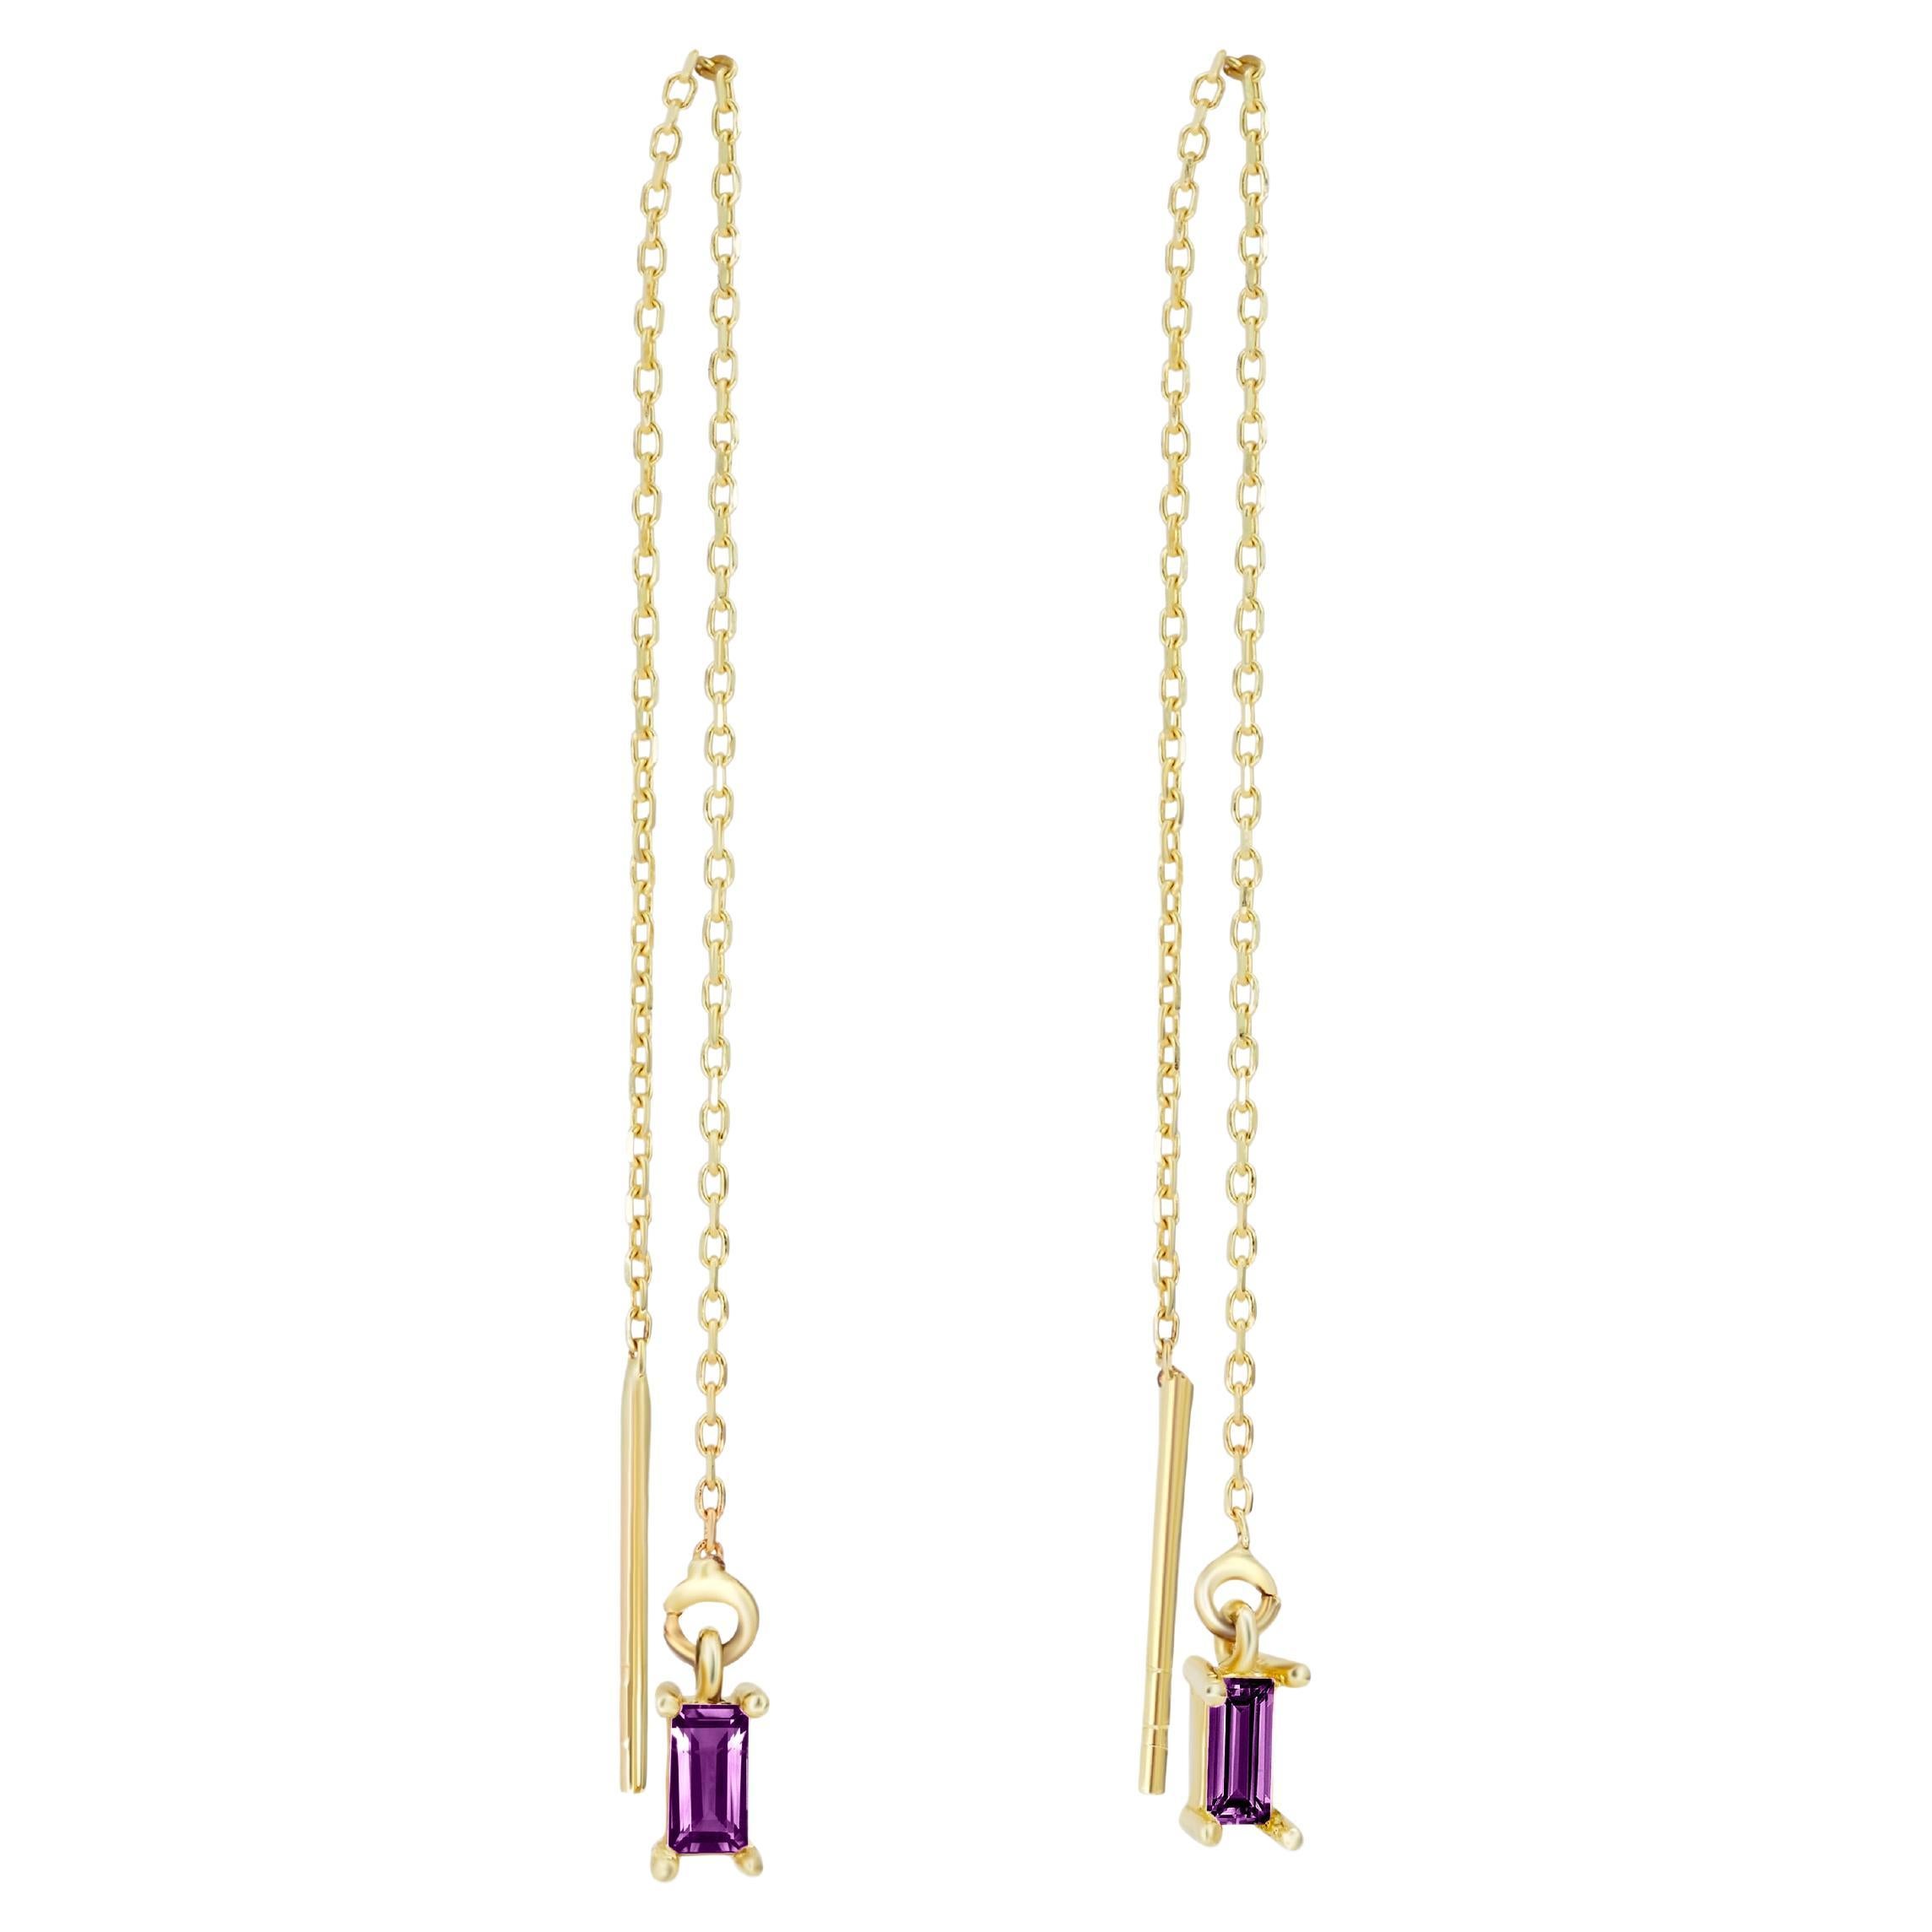 14k Solid Gold Drop Earrings with amethyst. 